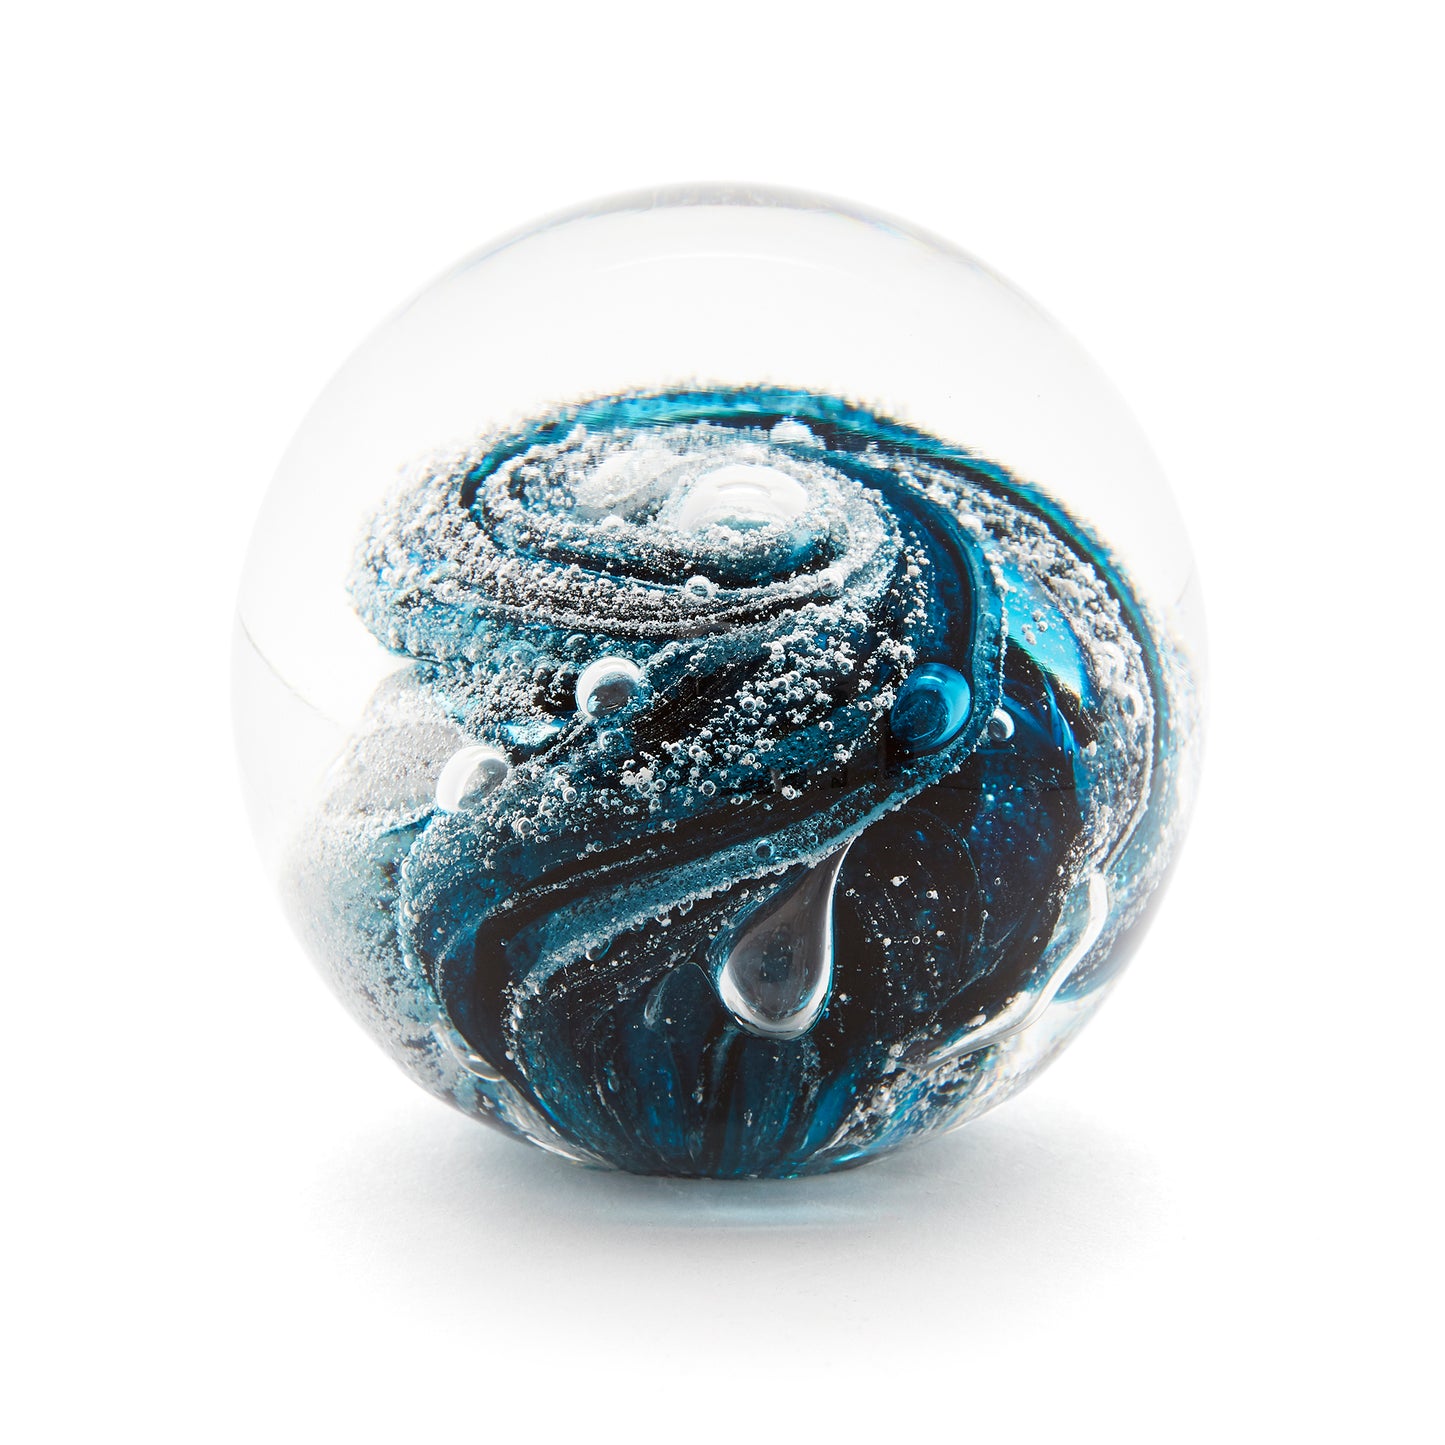 Round memorial glass art paperweight with cremation ash. Teal blue glass. Colour combination is called "Ocean Wave."